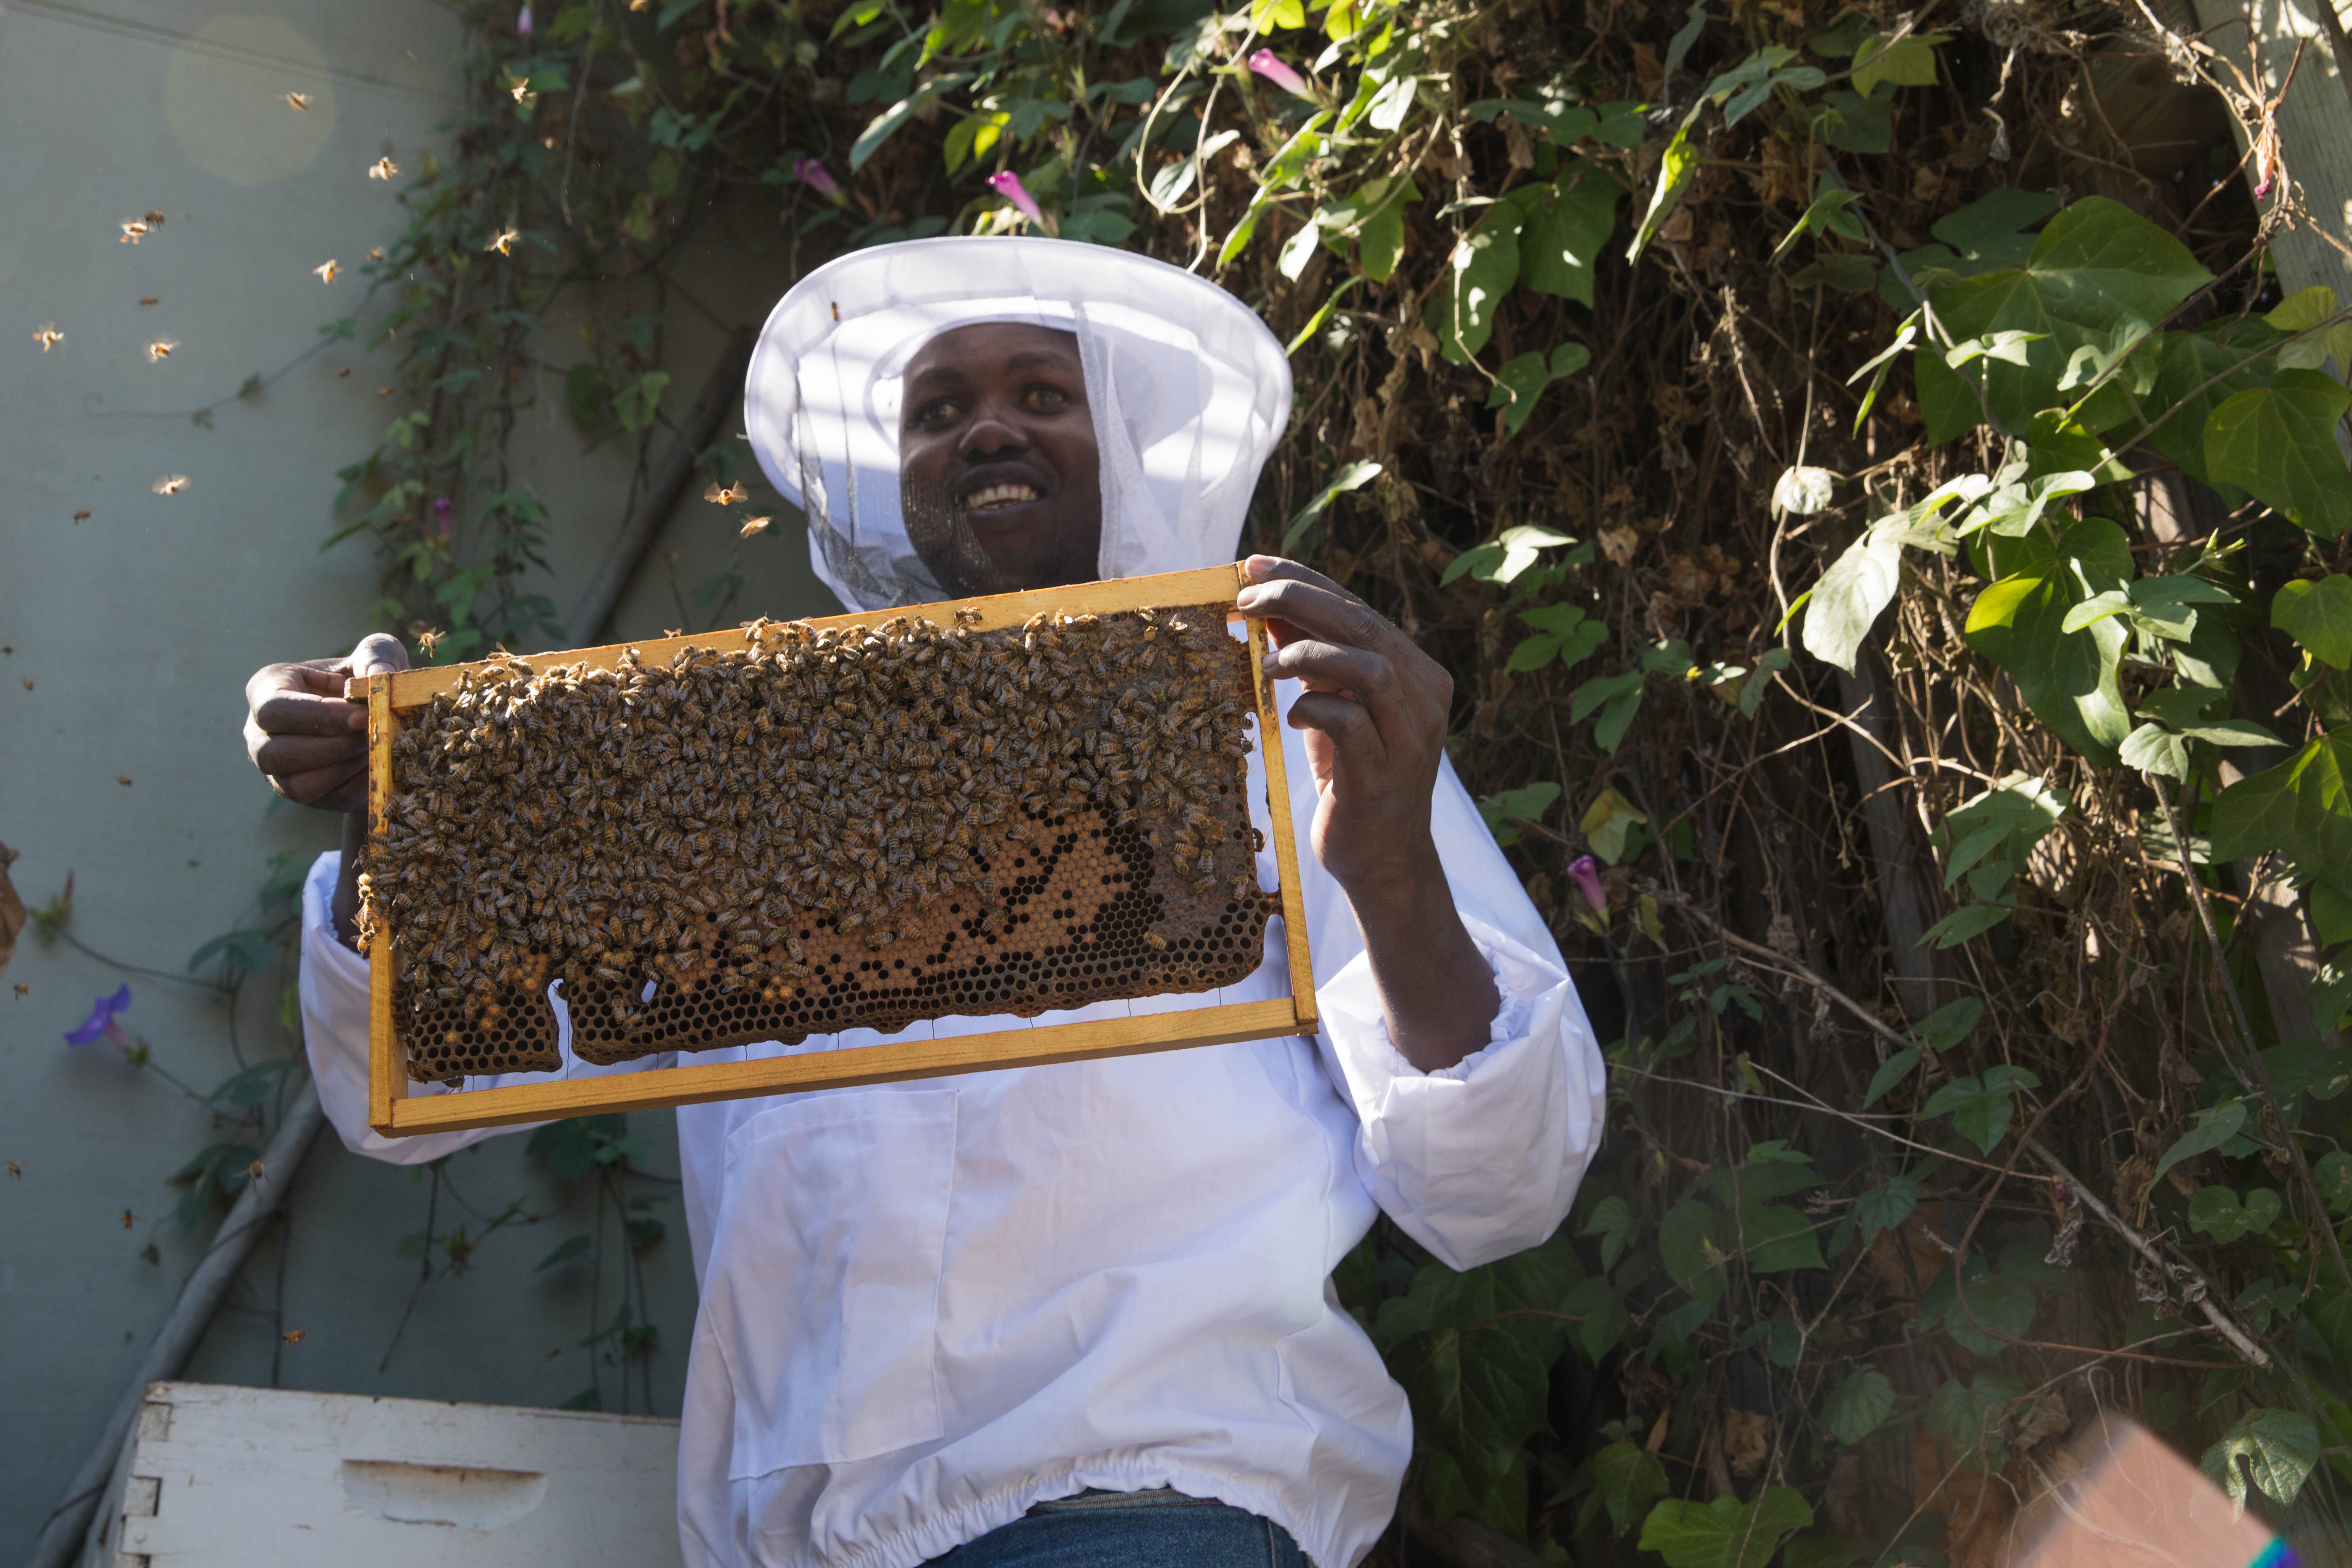 2017 Holman Prizewinner and beekeeper Ojok Simon smiles and holds up the wooden frame of a beehive.